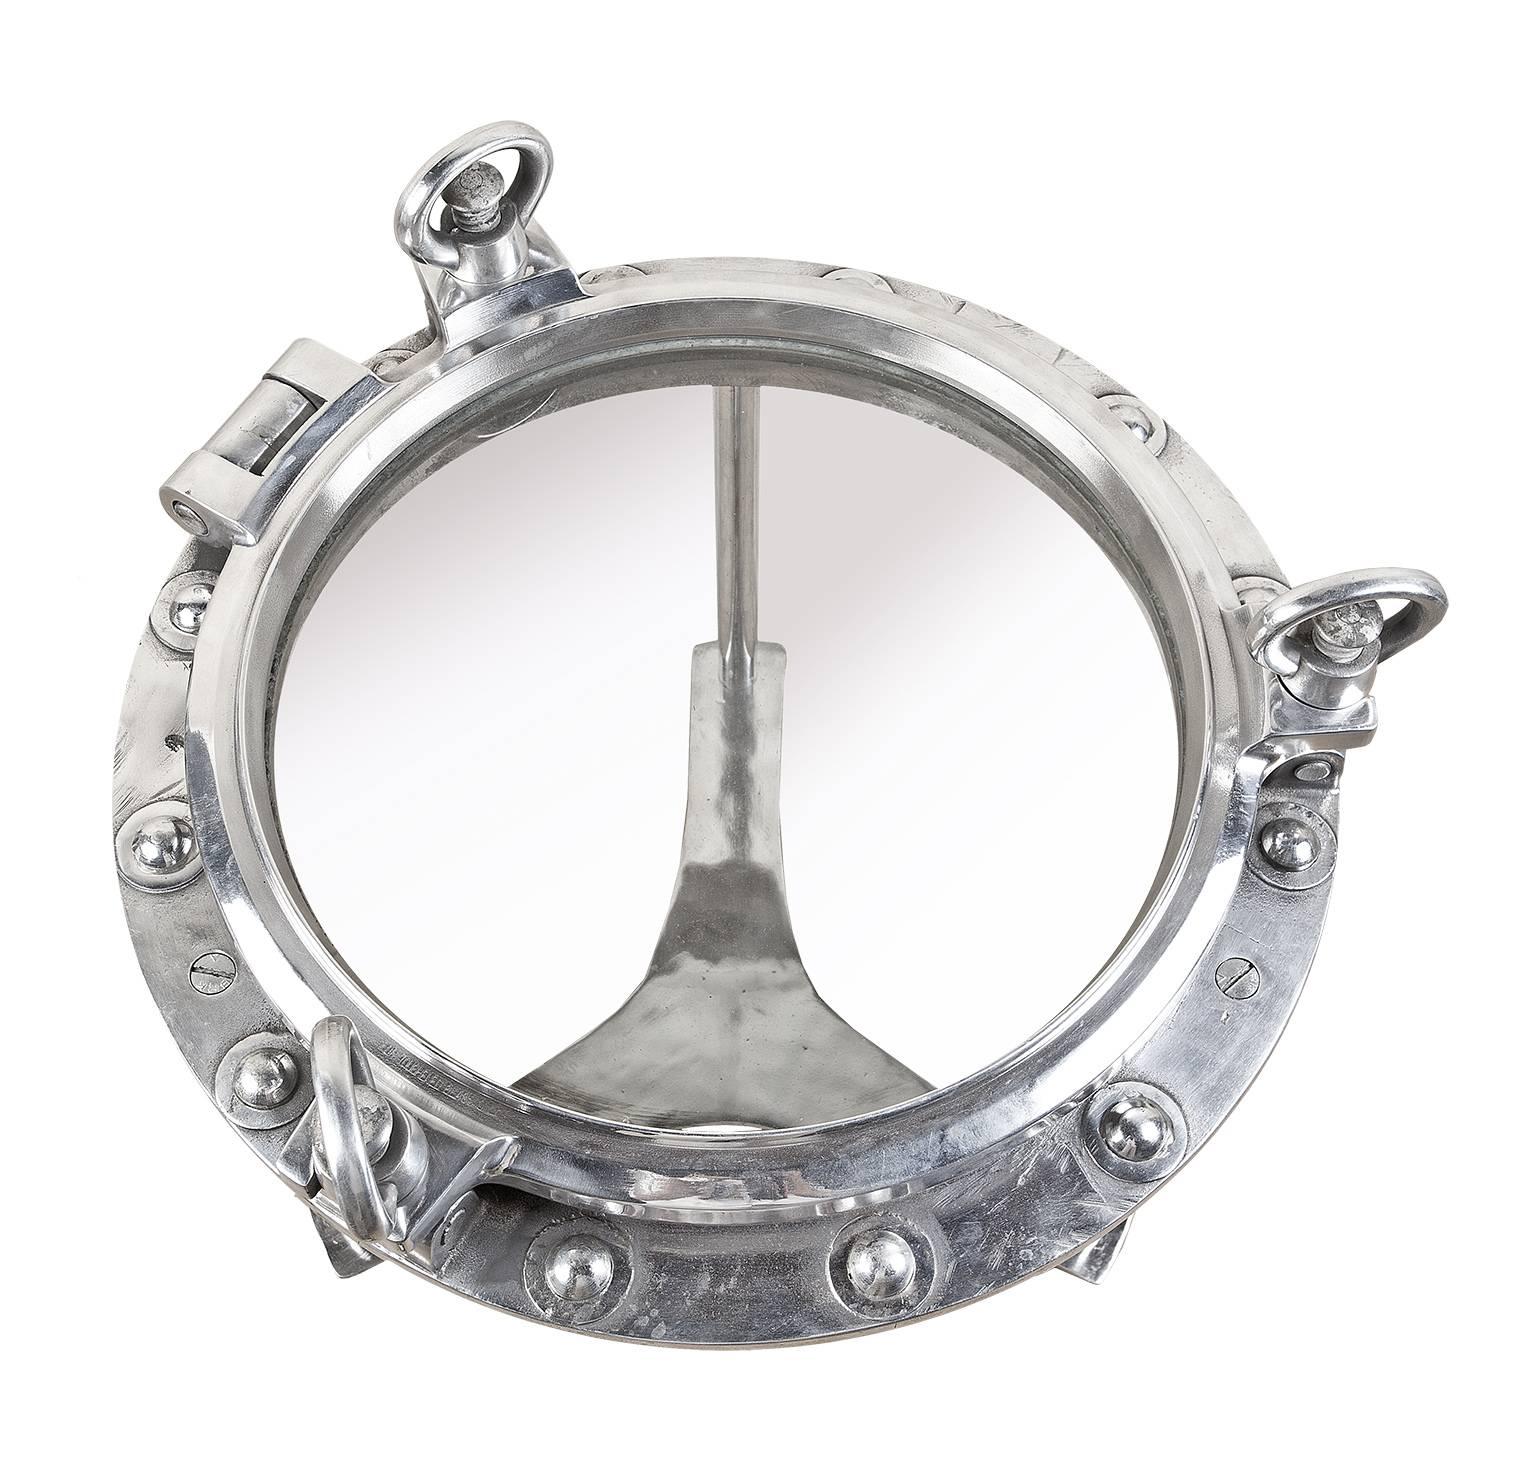 Industrial Pair of Original Nautical Chrome Working Porthole Window Tables